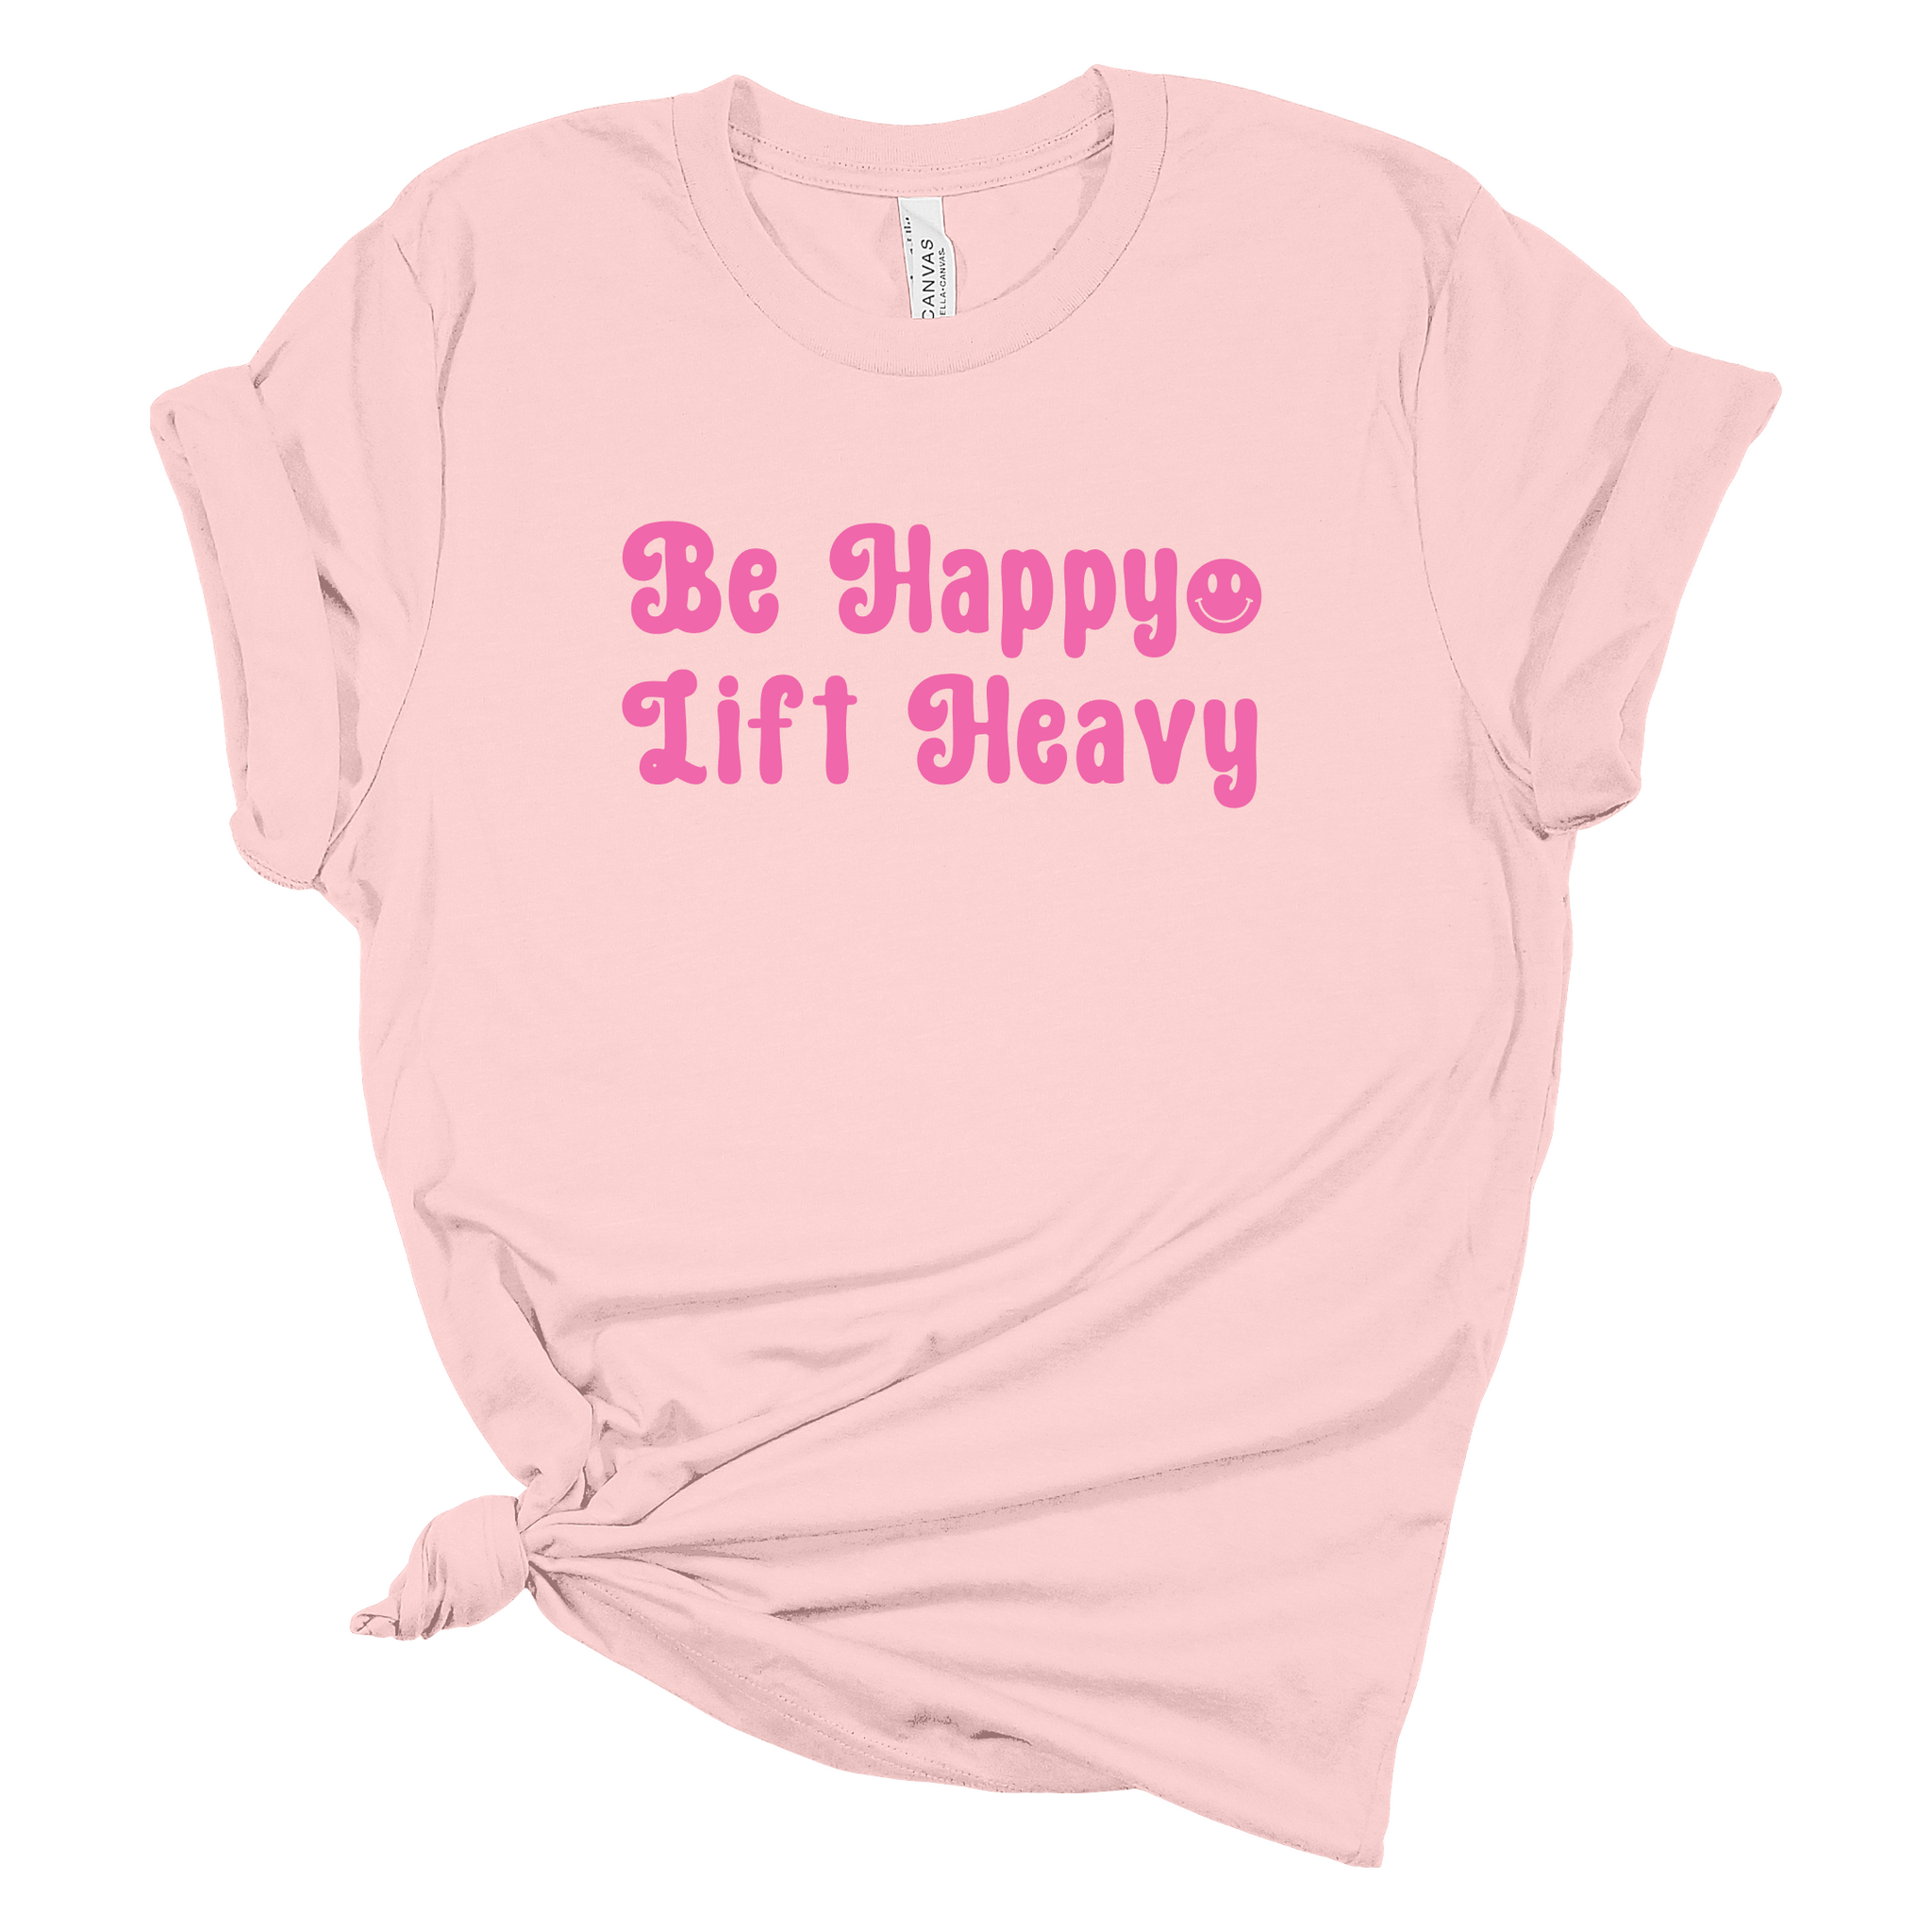 Be Happy Light Heavy Smiley - Light Pink Tshirt - Adult & Women's Gym Top - S003